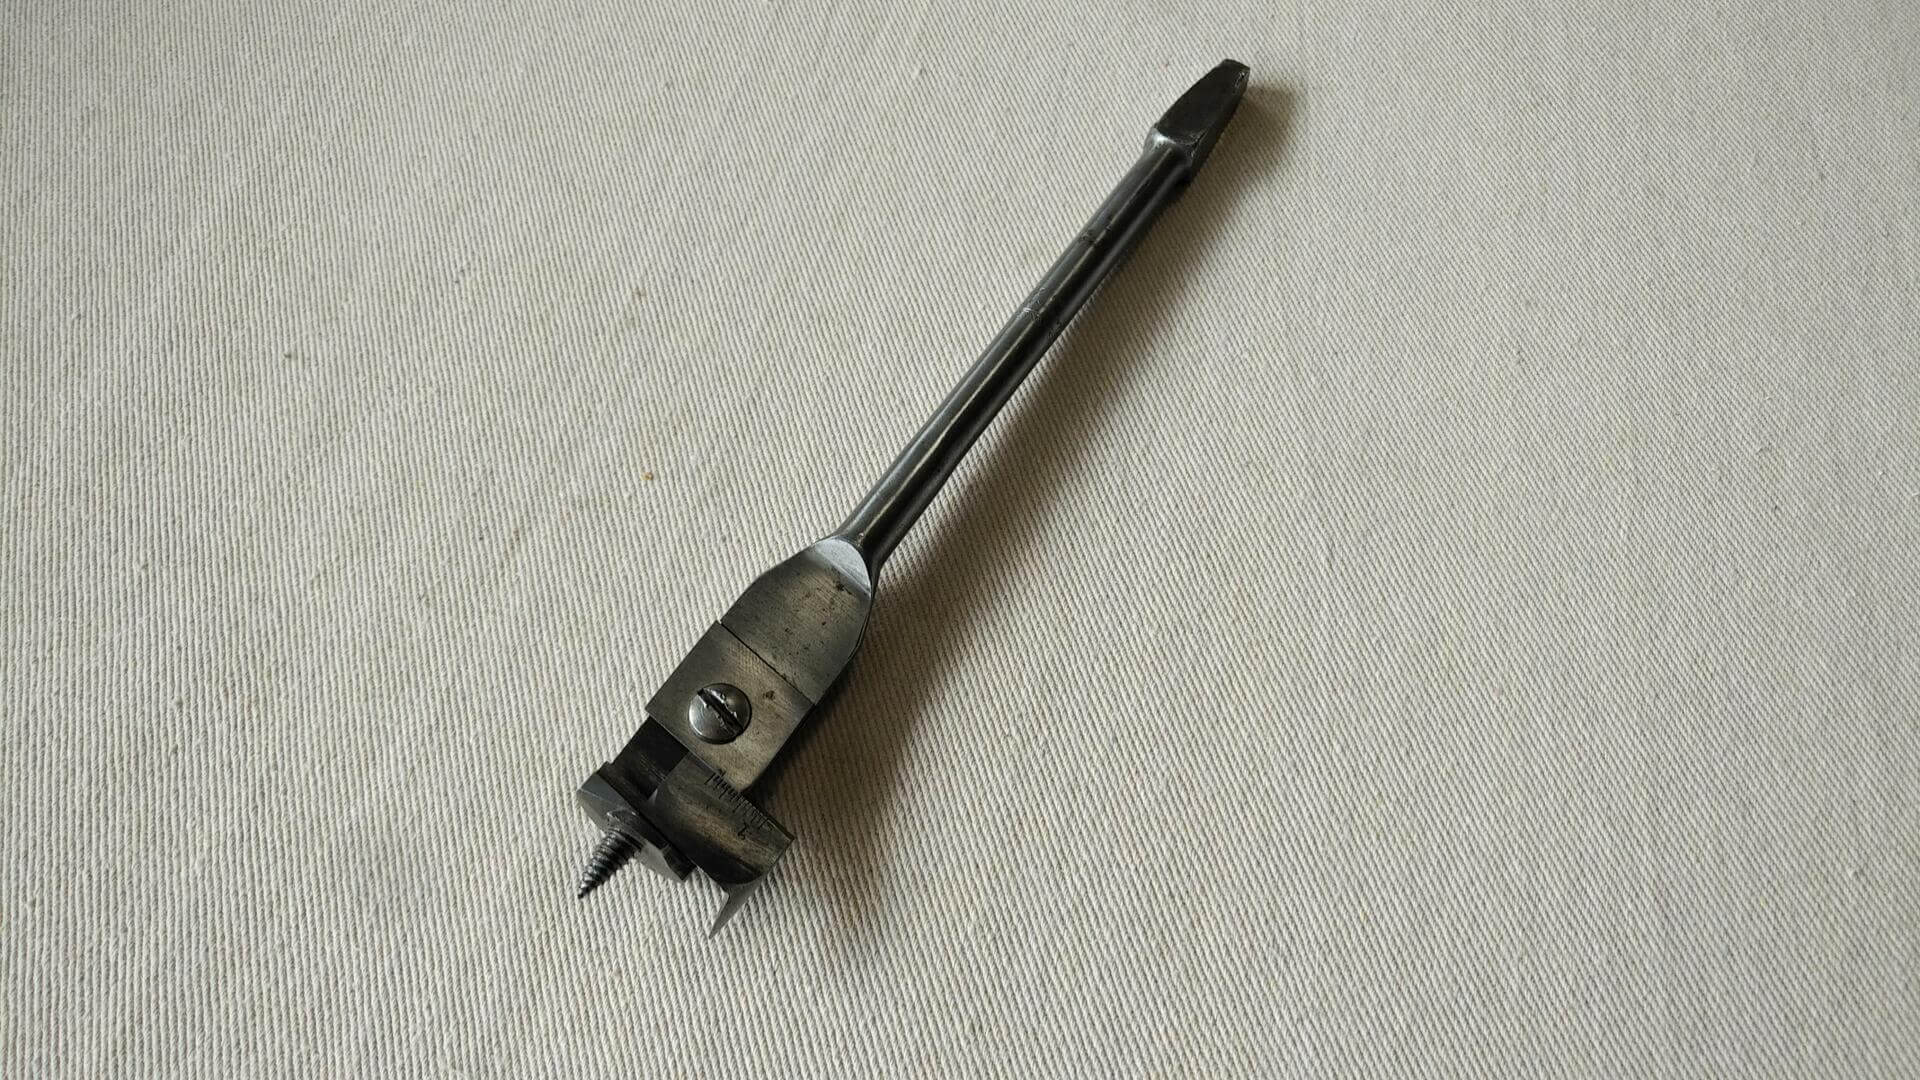 Antique Stanley micro-dial adjustable expansive boring drill bit No 129. Vintage made in USA collectible carpentry and woodworking cabinet maker hand tools